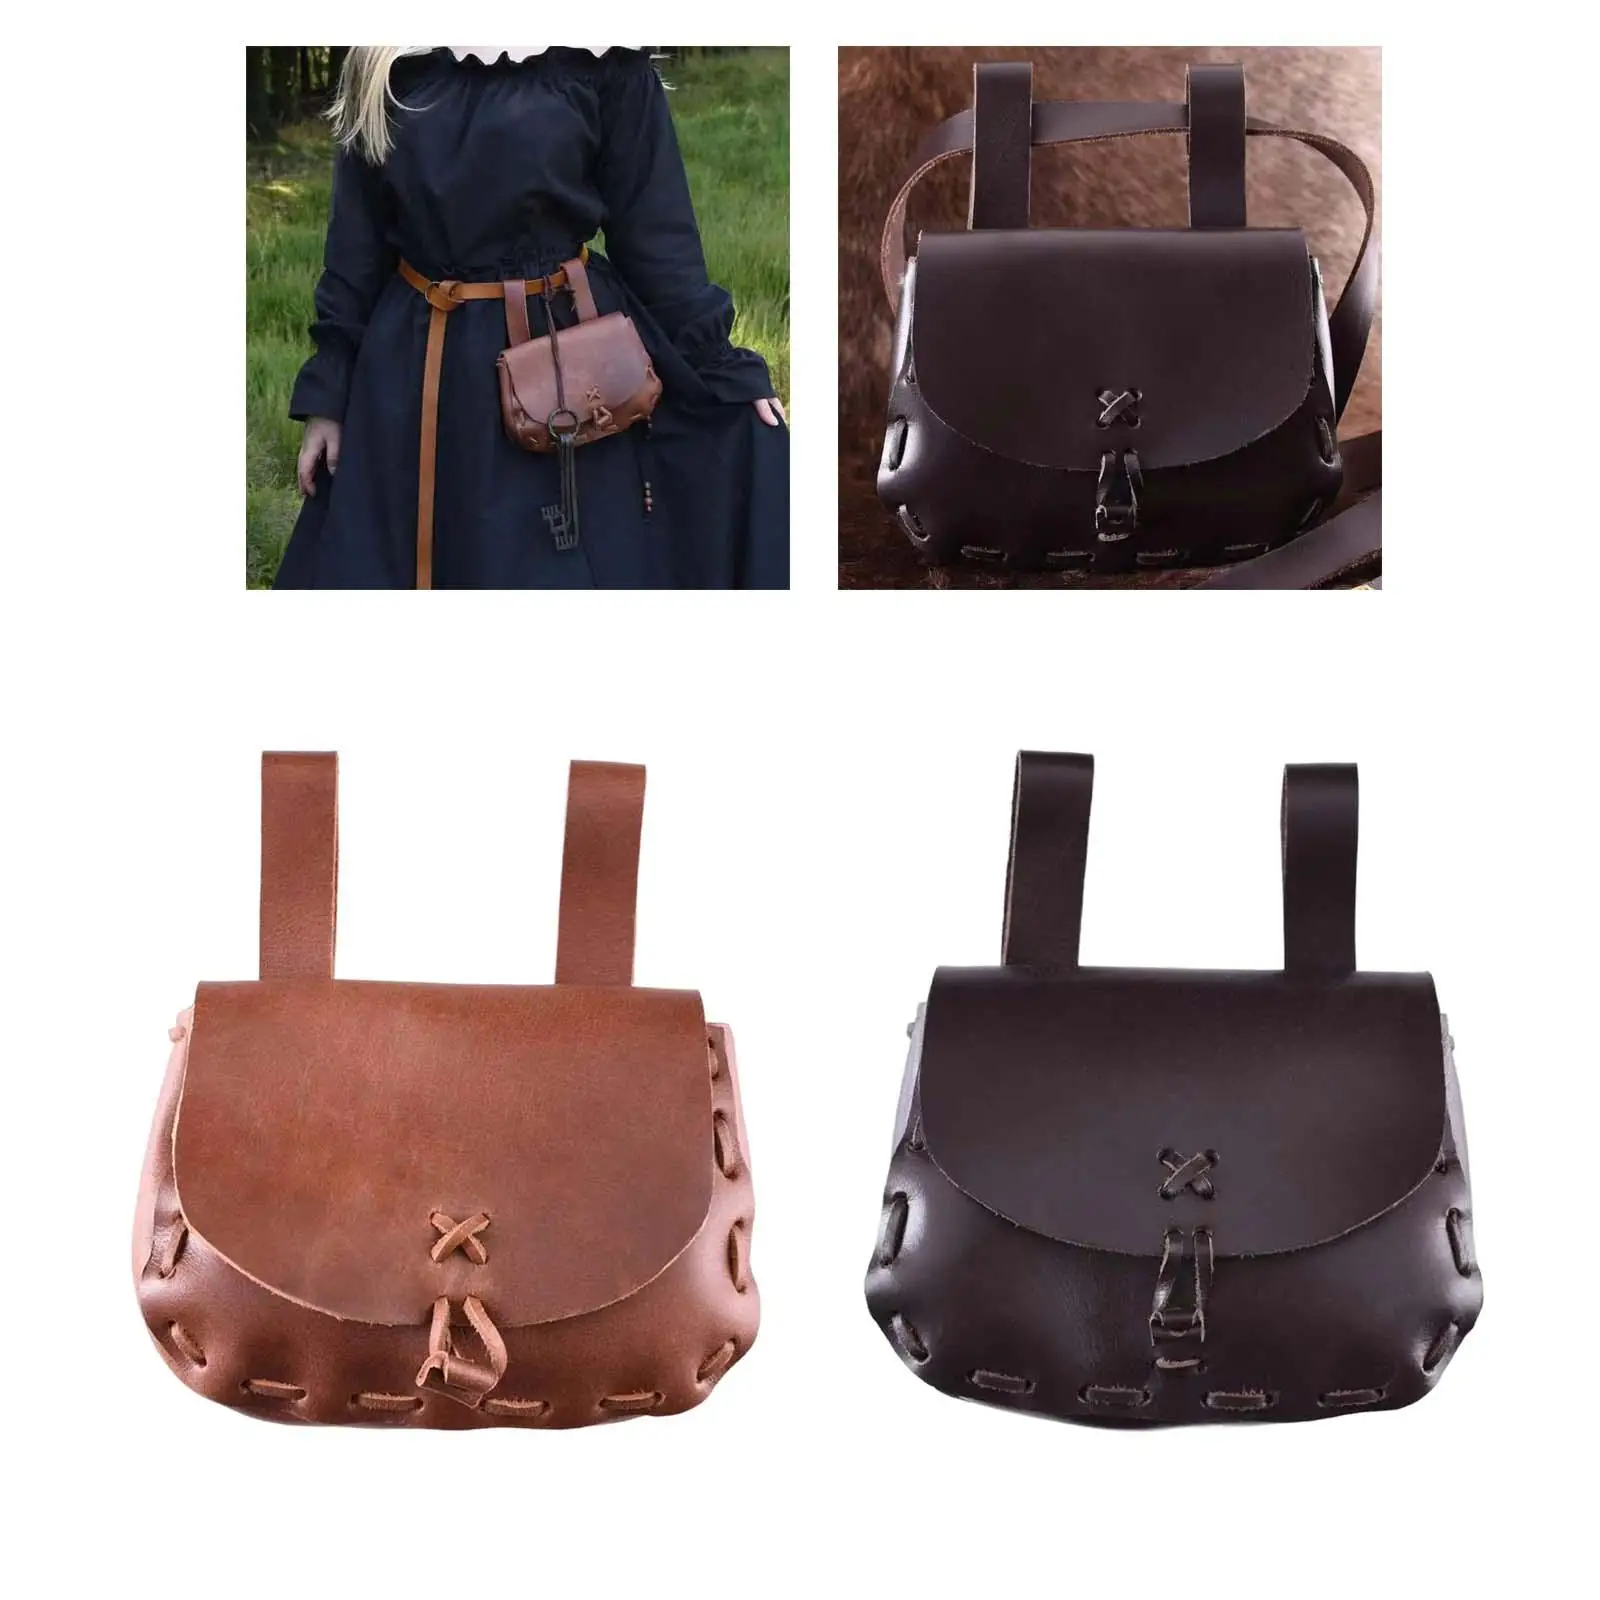 PU Leather Retro Waist Pouch Bag Medieval Waterproof Vintage Waist Purse Wallet for Travel Hiking Summer Cosplay Party Men Women